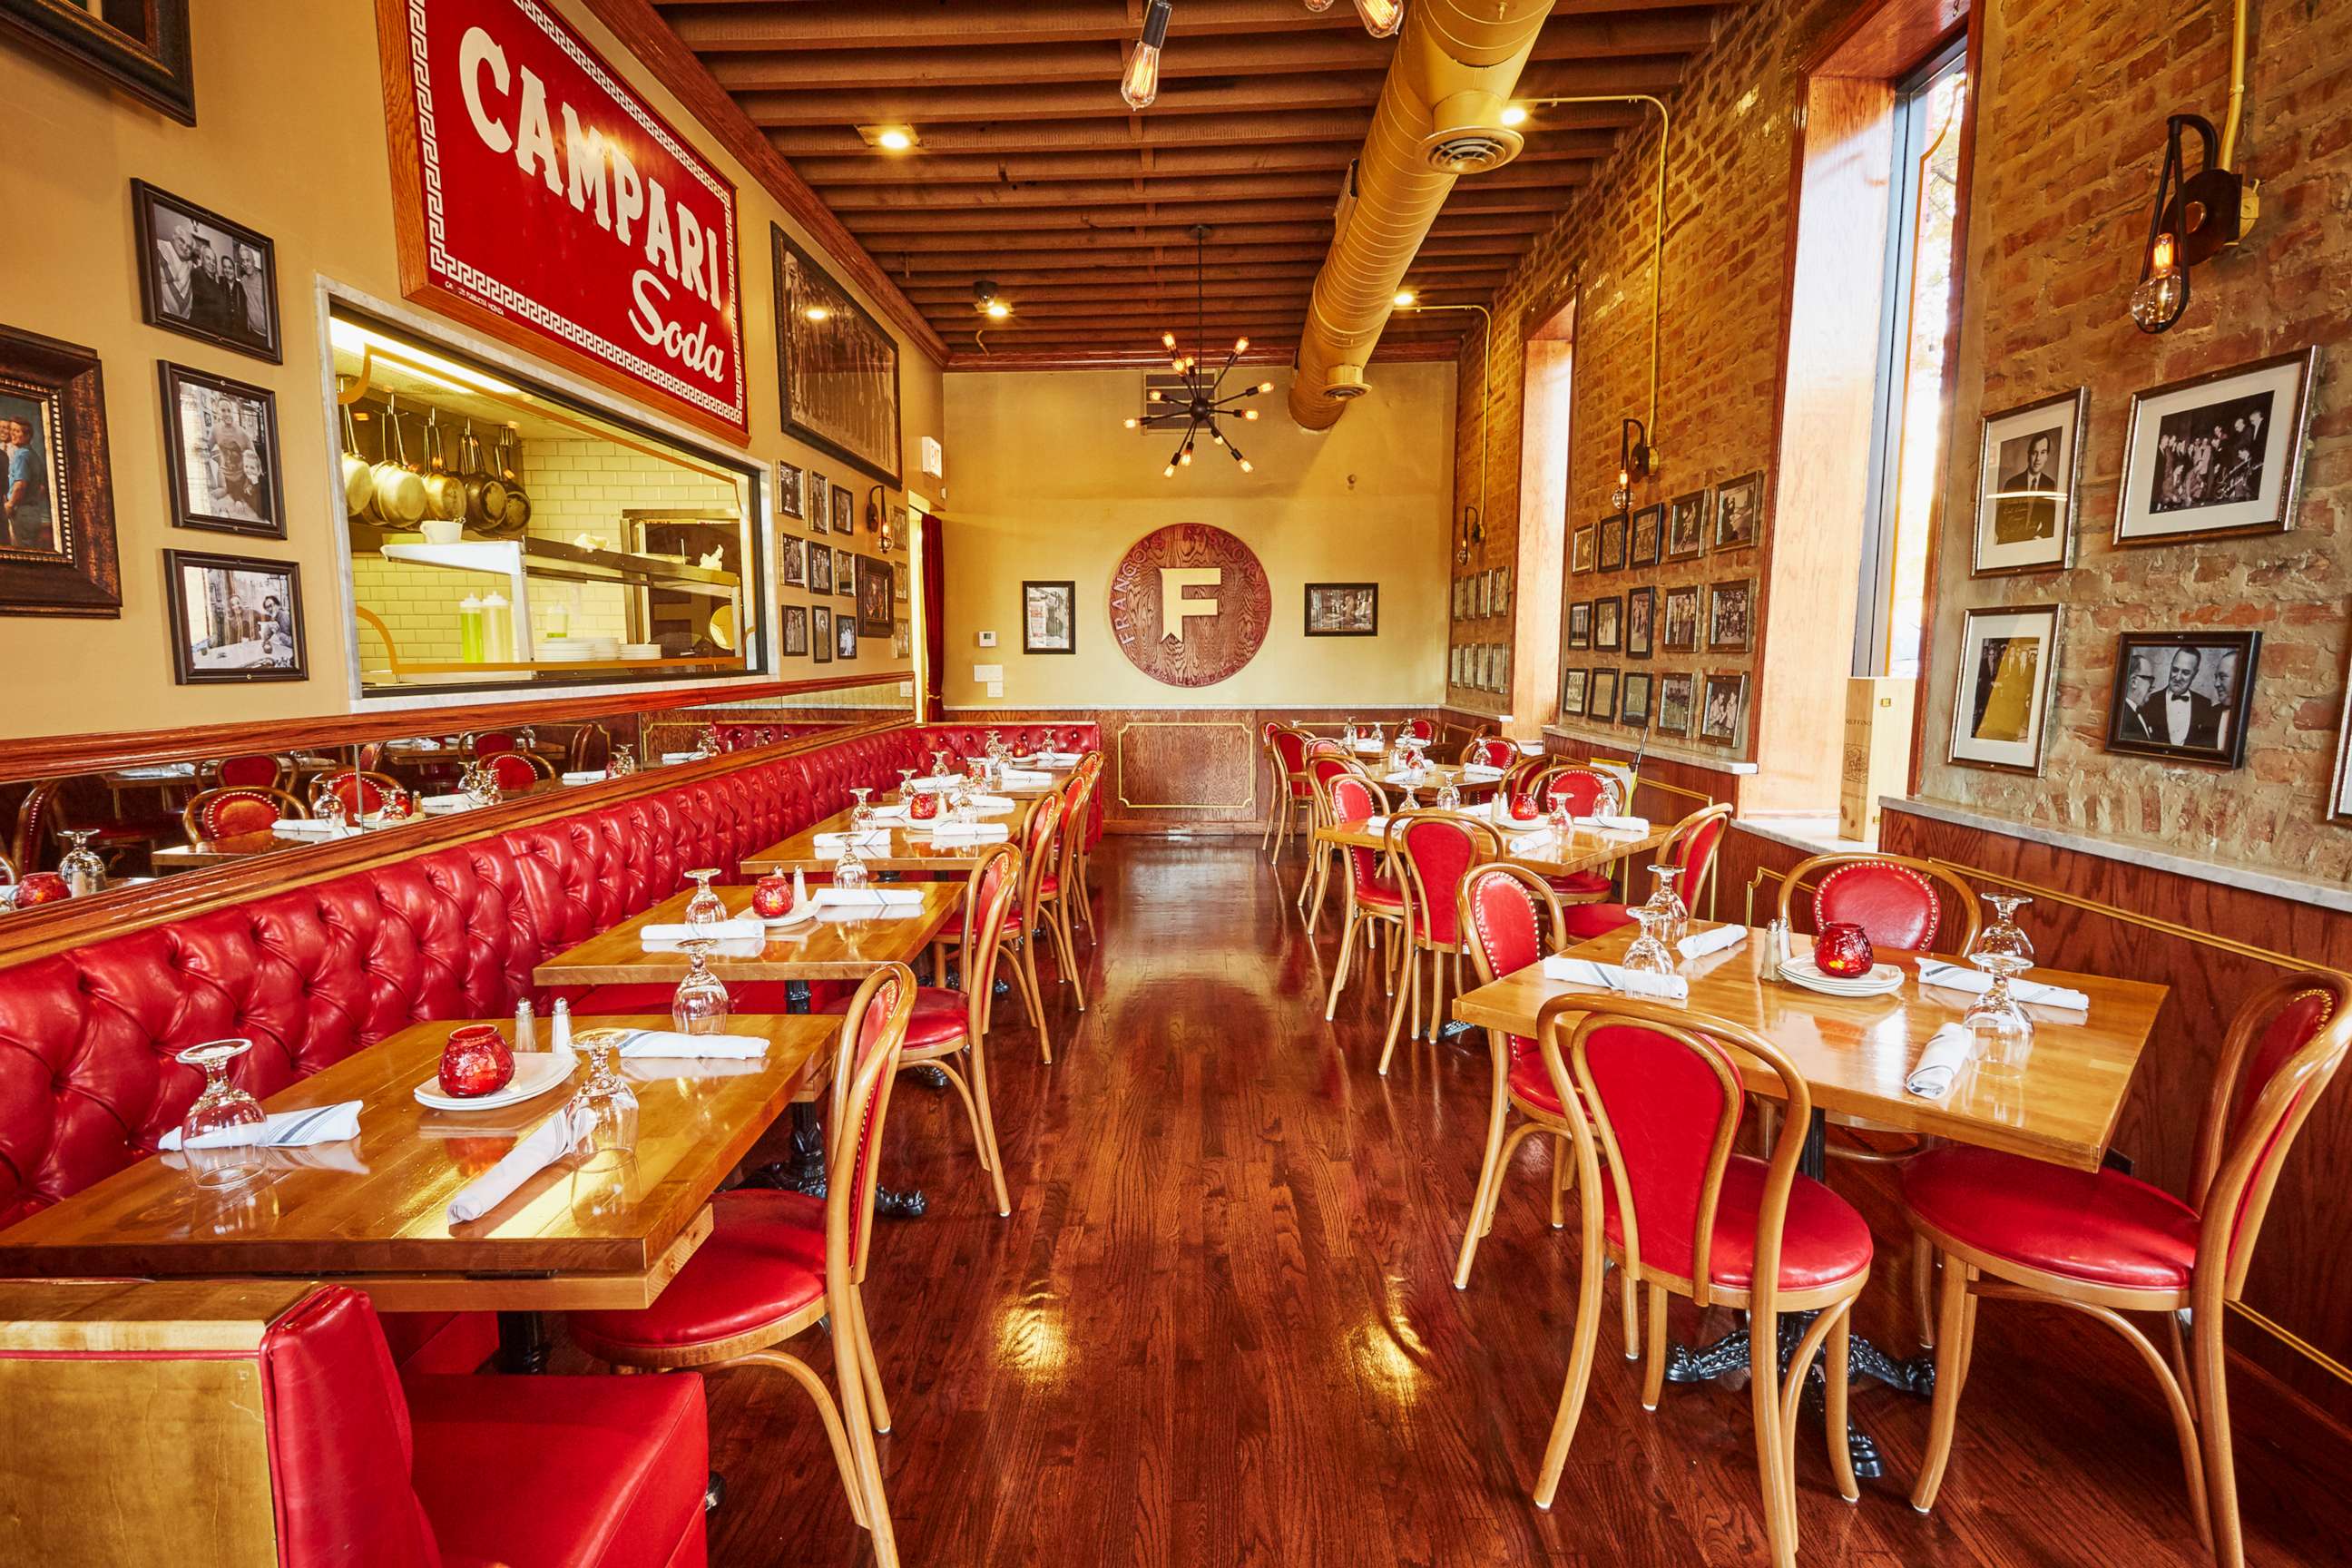 PHOTO: Franco's Ristorante in Chicago sits empty during the coronavirus pandemic.